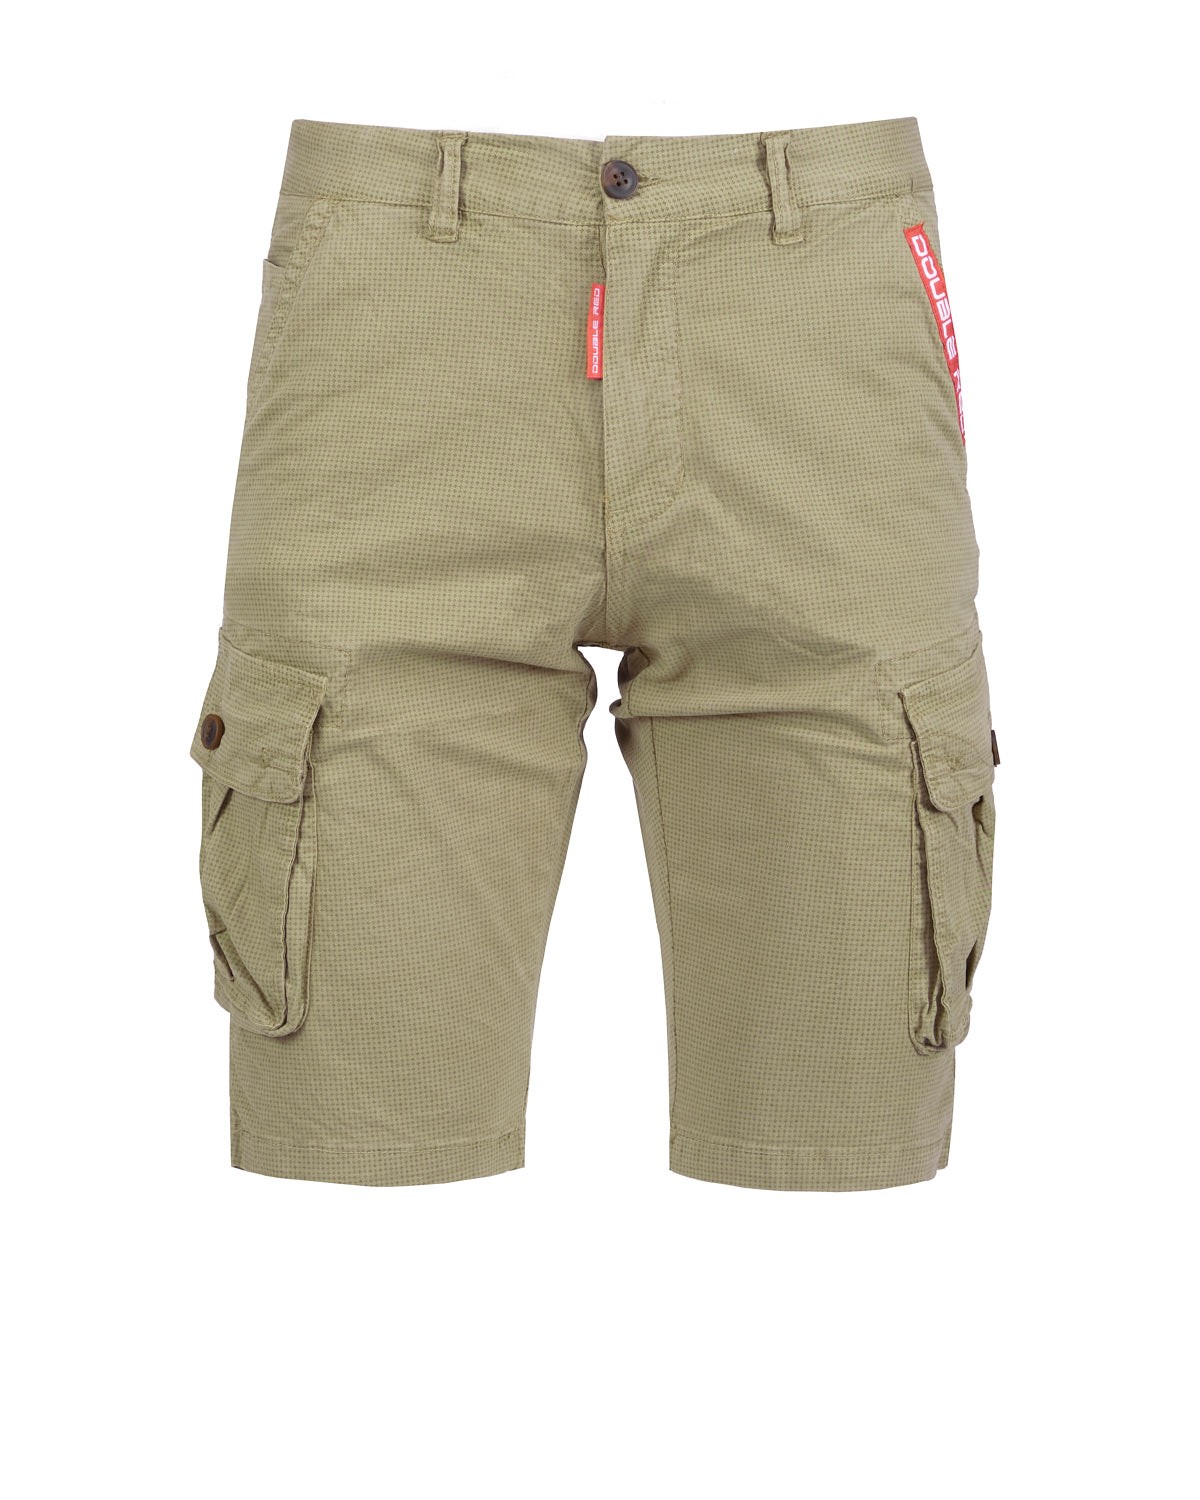 SQUERS Shorts Desert - Double Red